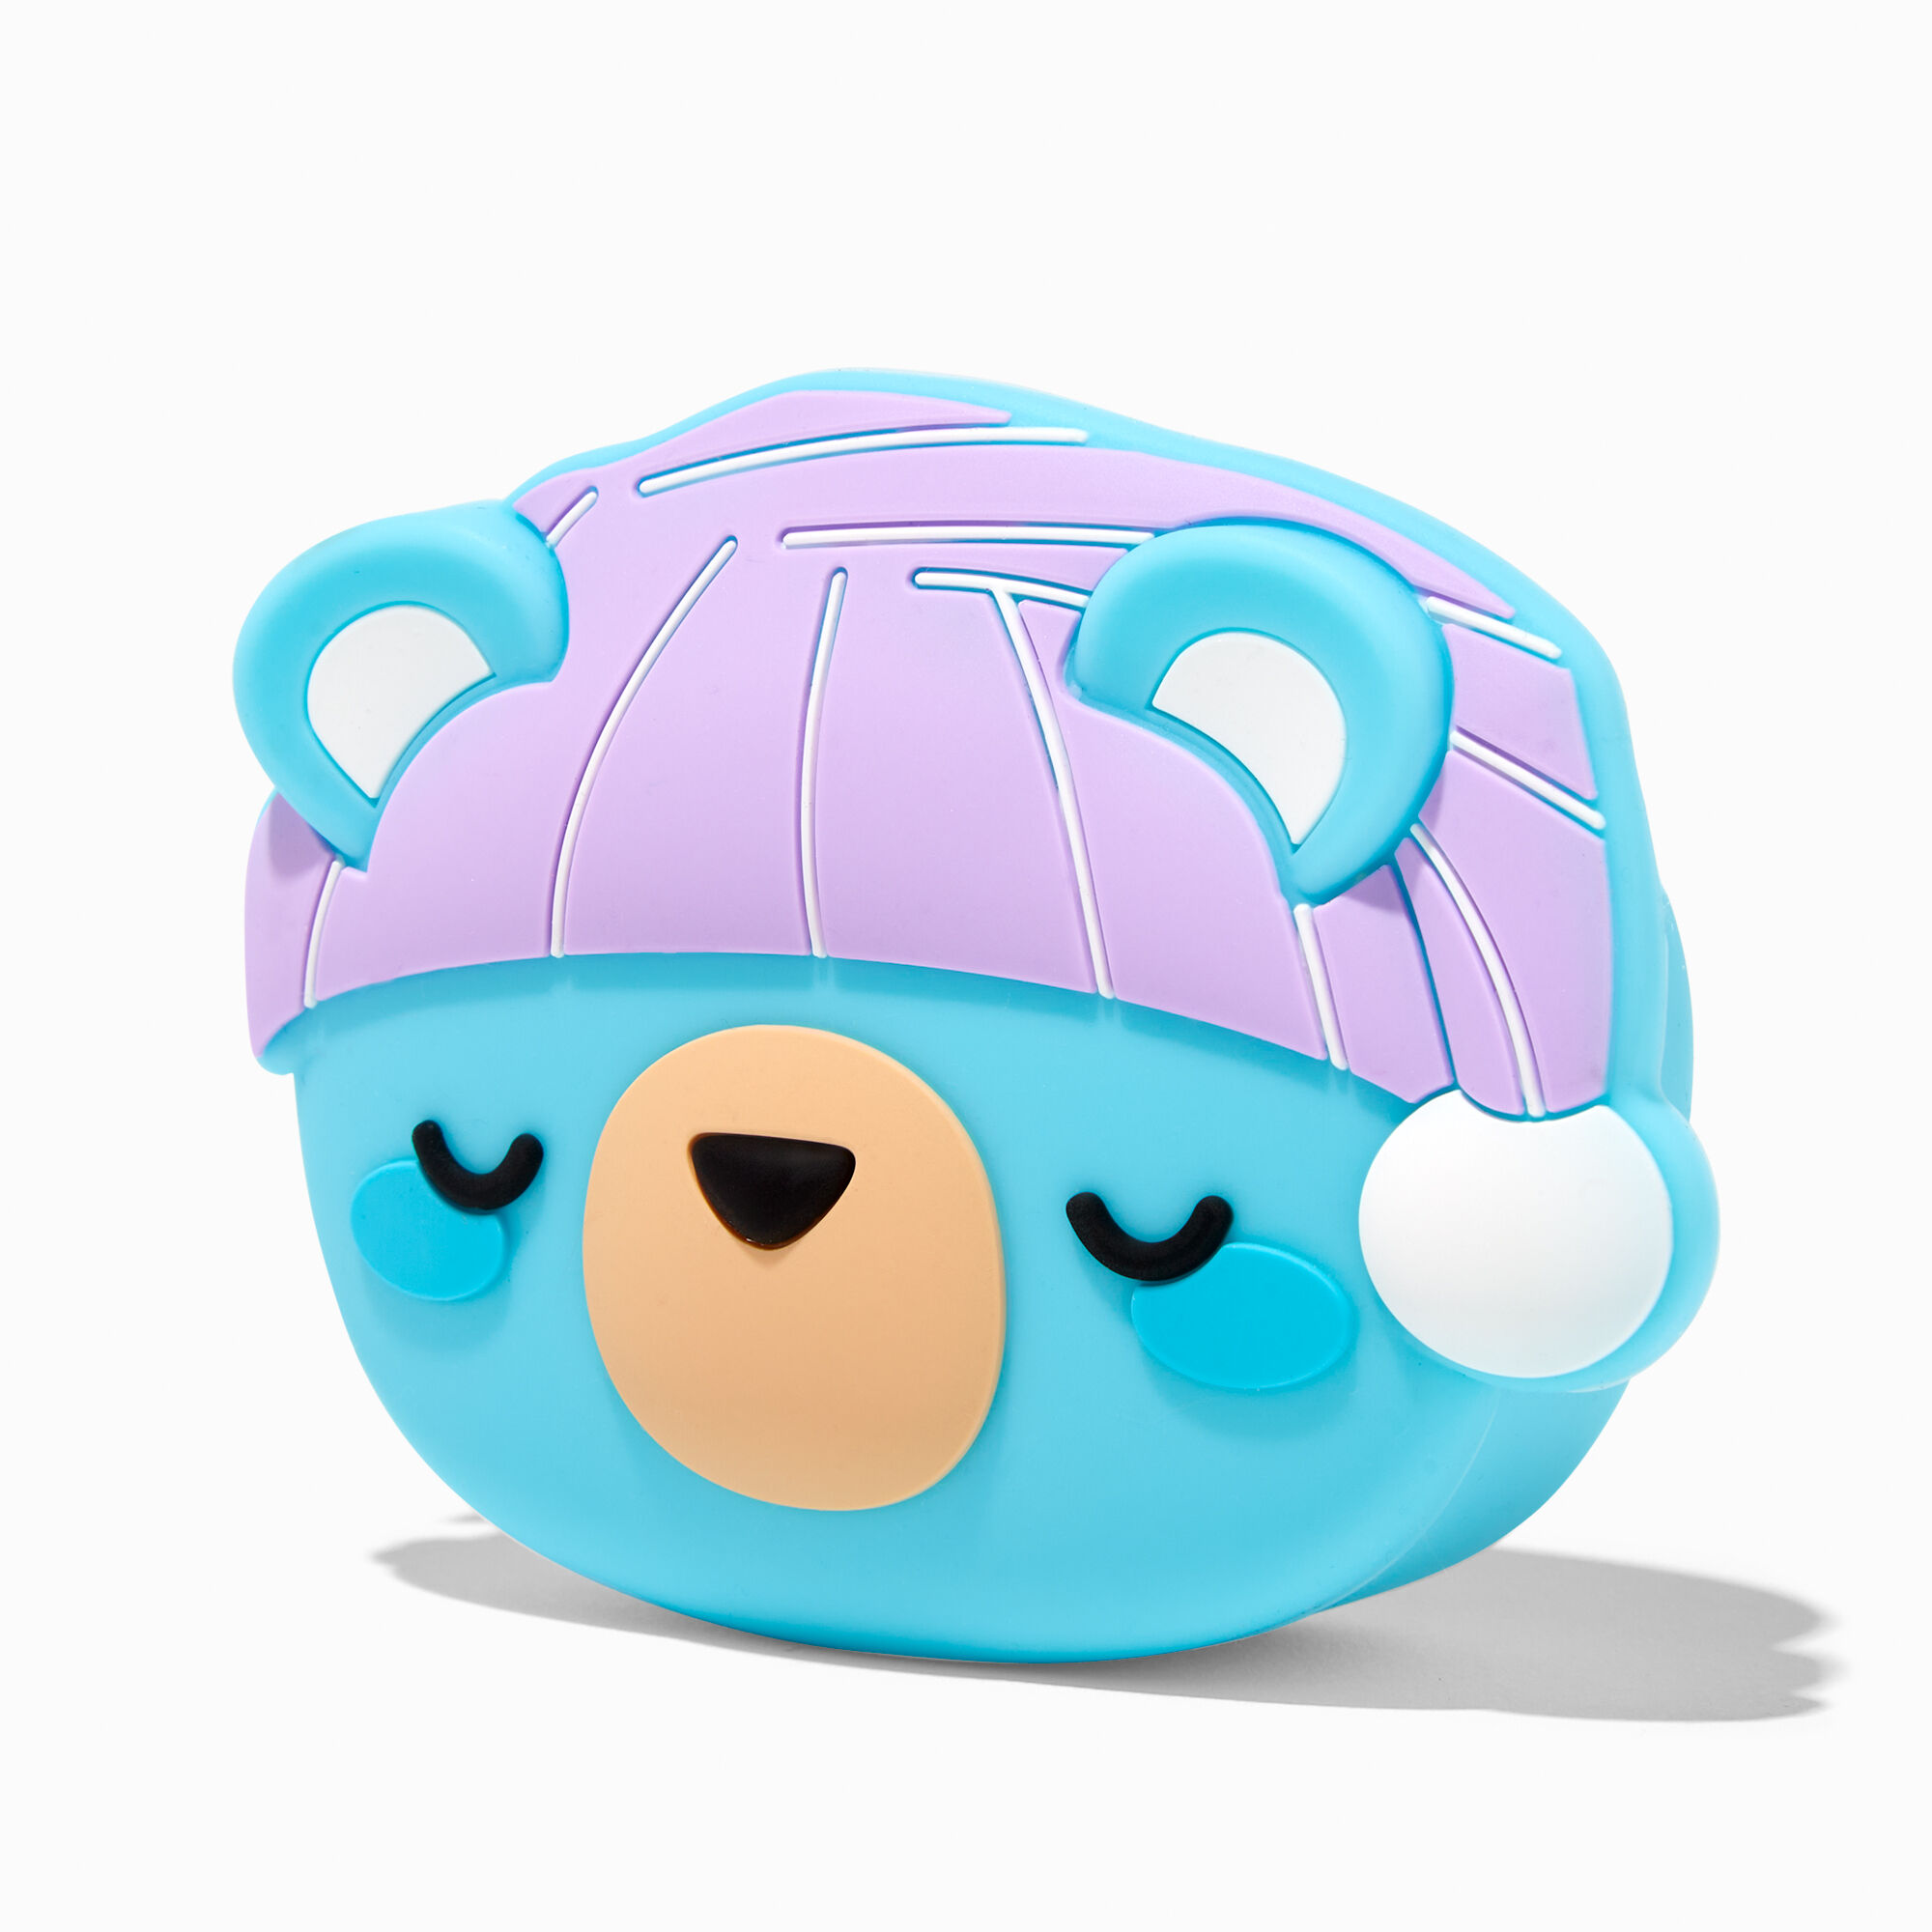 View Claires Sleepy Bear Jelly Coin Purse information